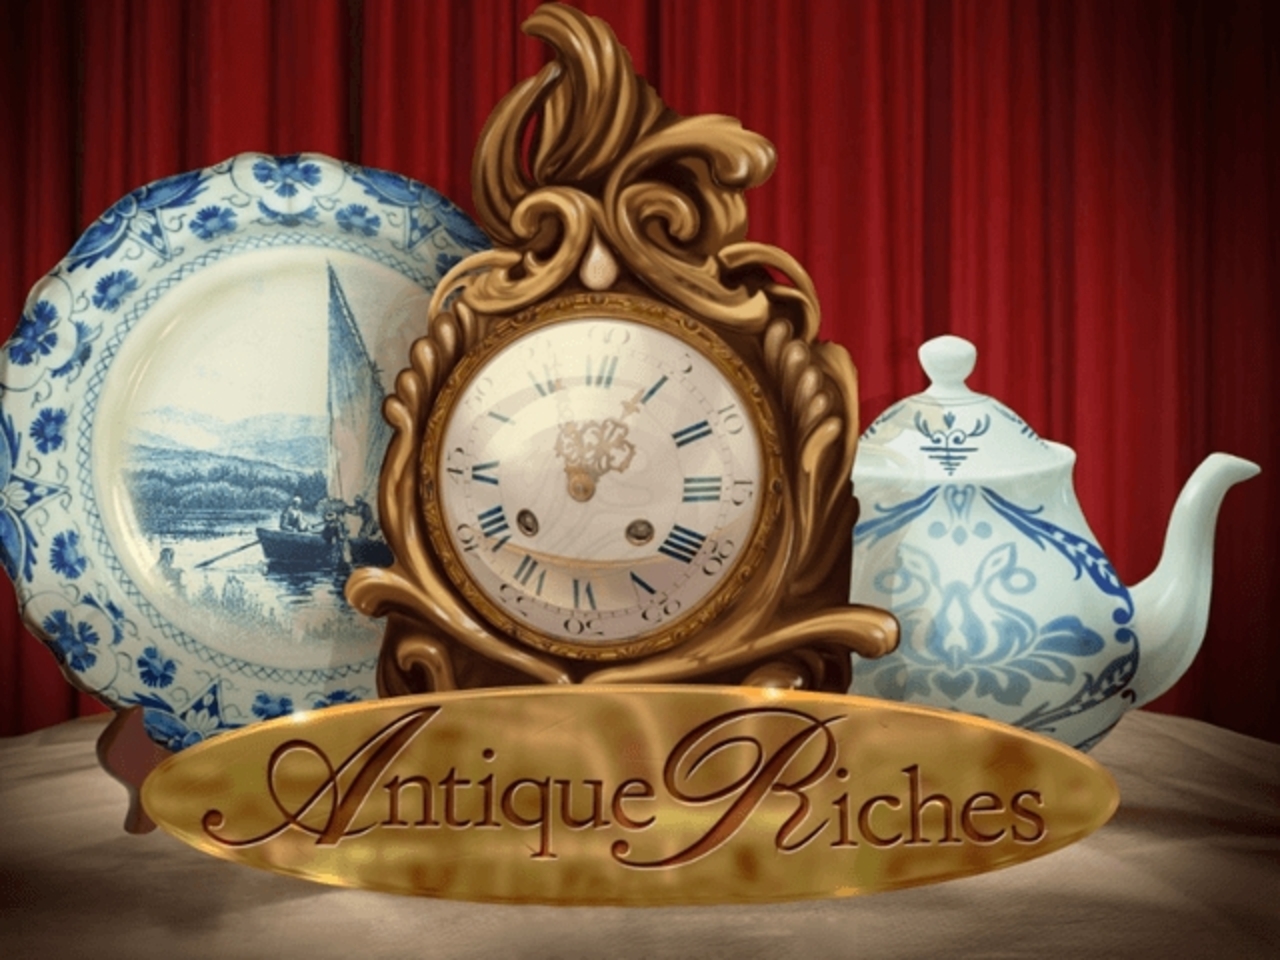 The Antique Riches Online Slot Demo Game by Genesis Gaming